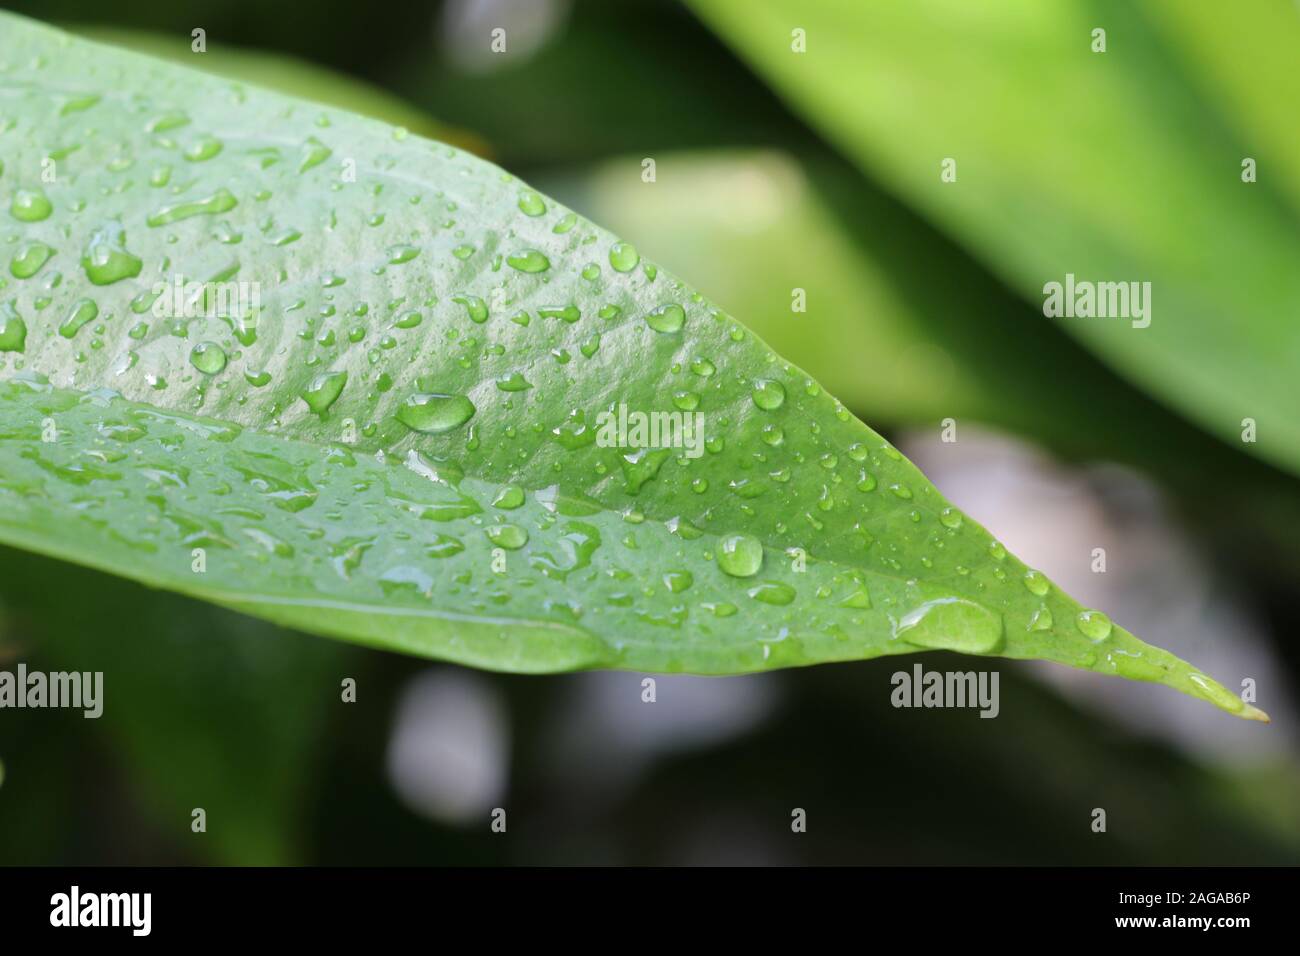 Water drops on green leaves Stock Photo